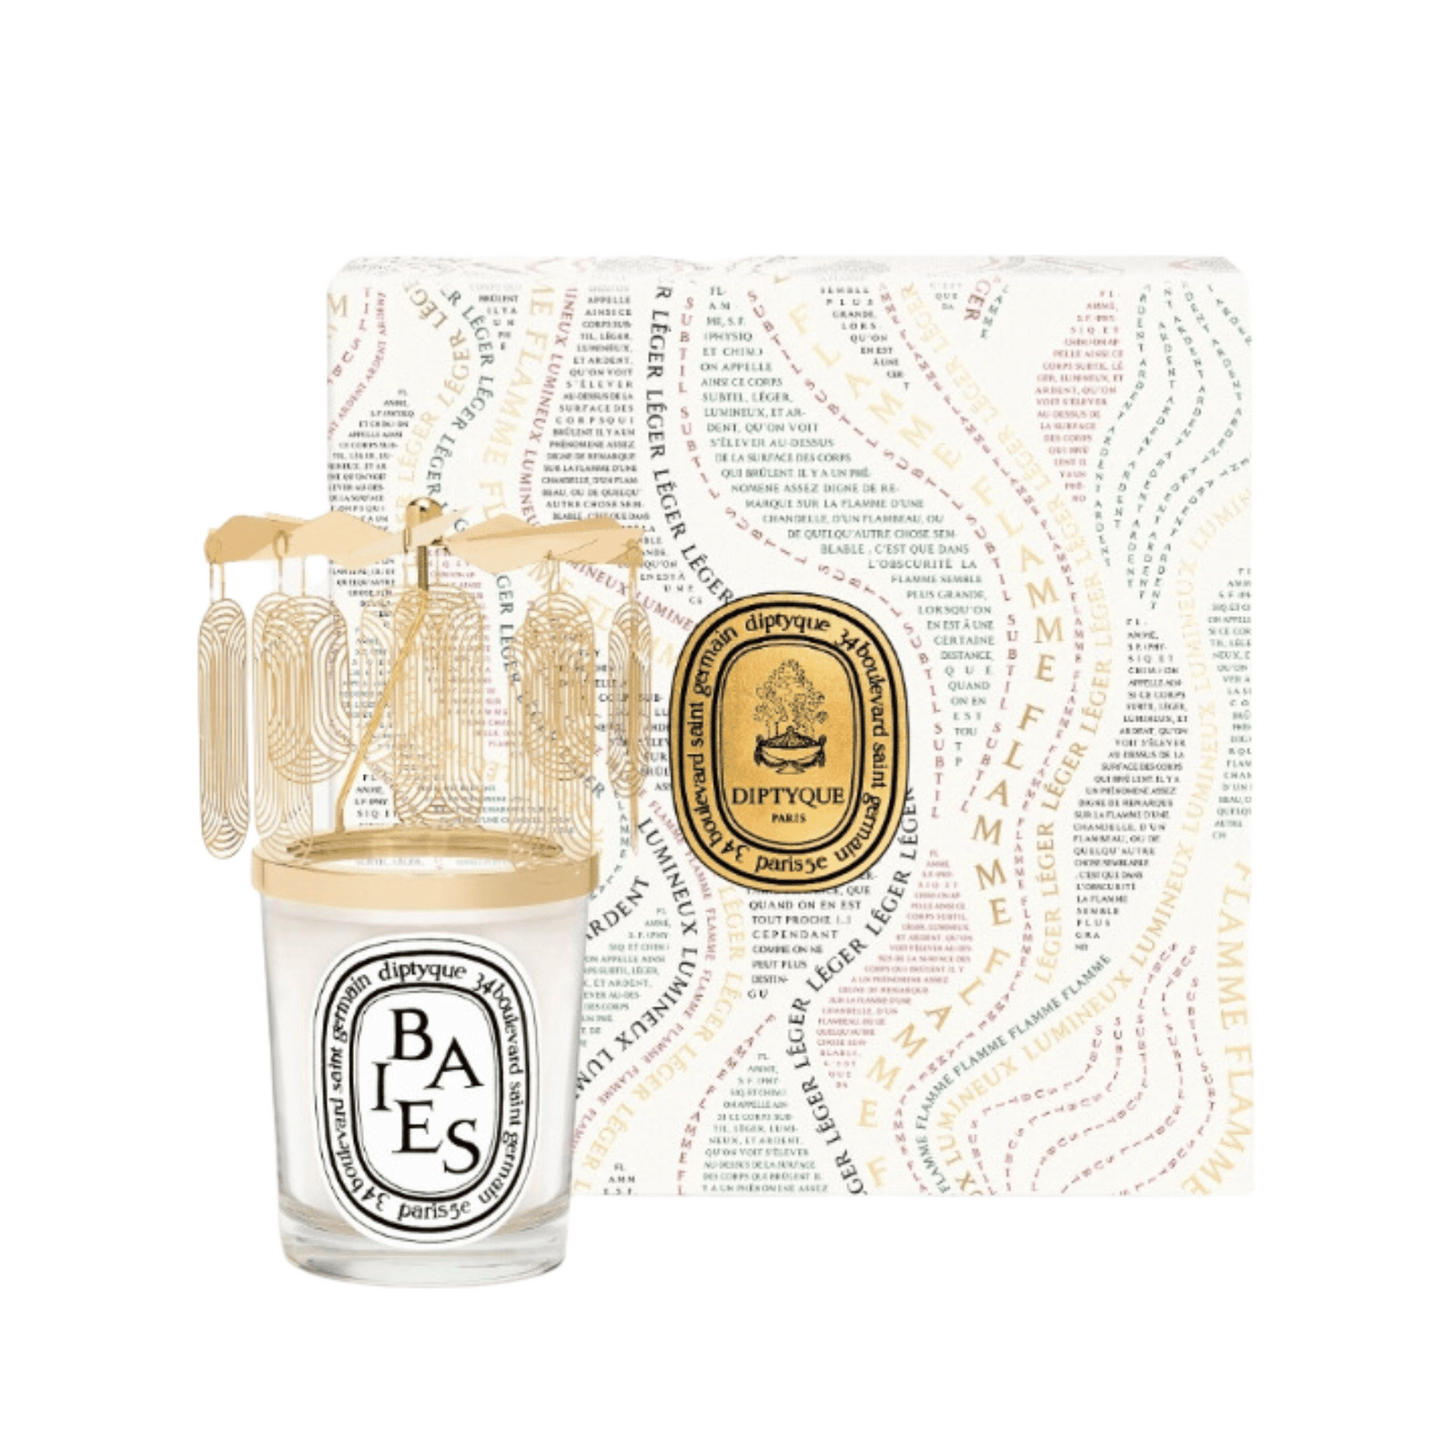 Primary Image of Limited-Edition Carousel Set with Baies Candle